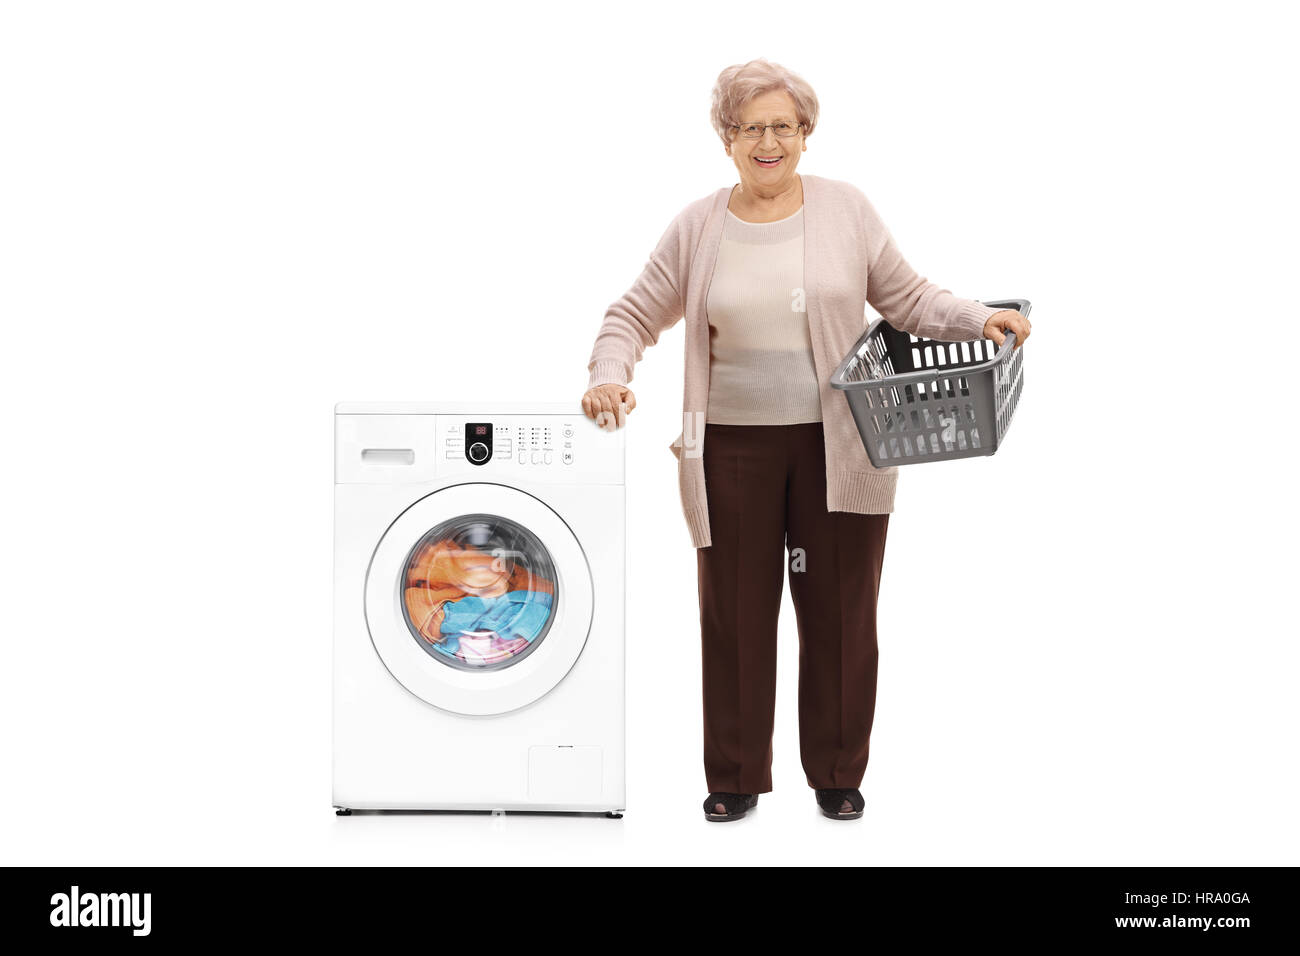 Full length portrait of an elderly woman with an empty laundry basket standing next to a washing machine isolated on white background Stock Photo